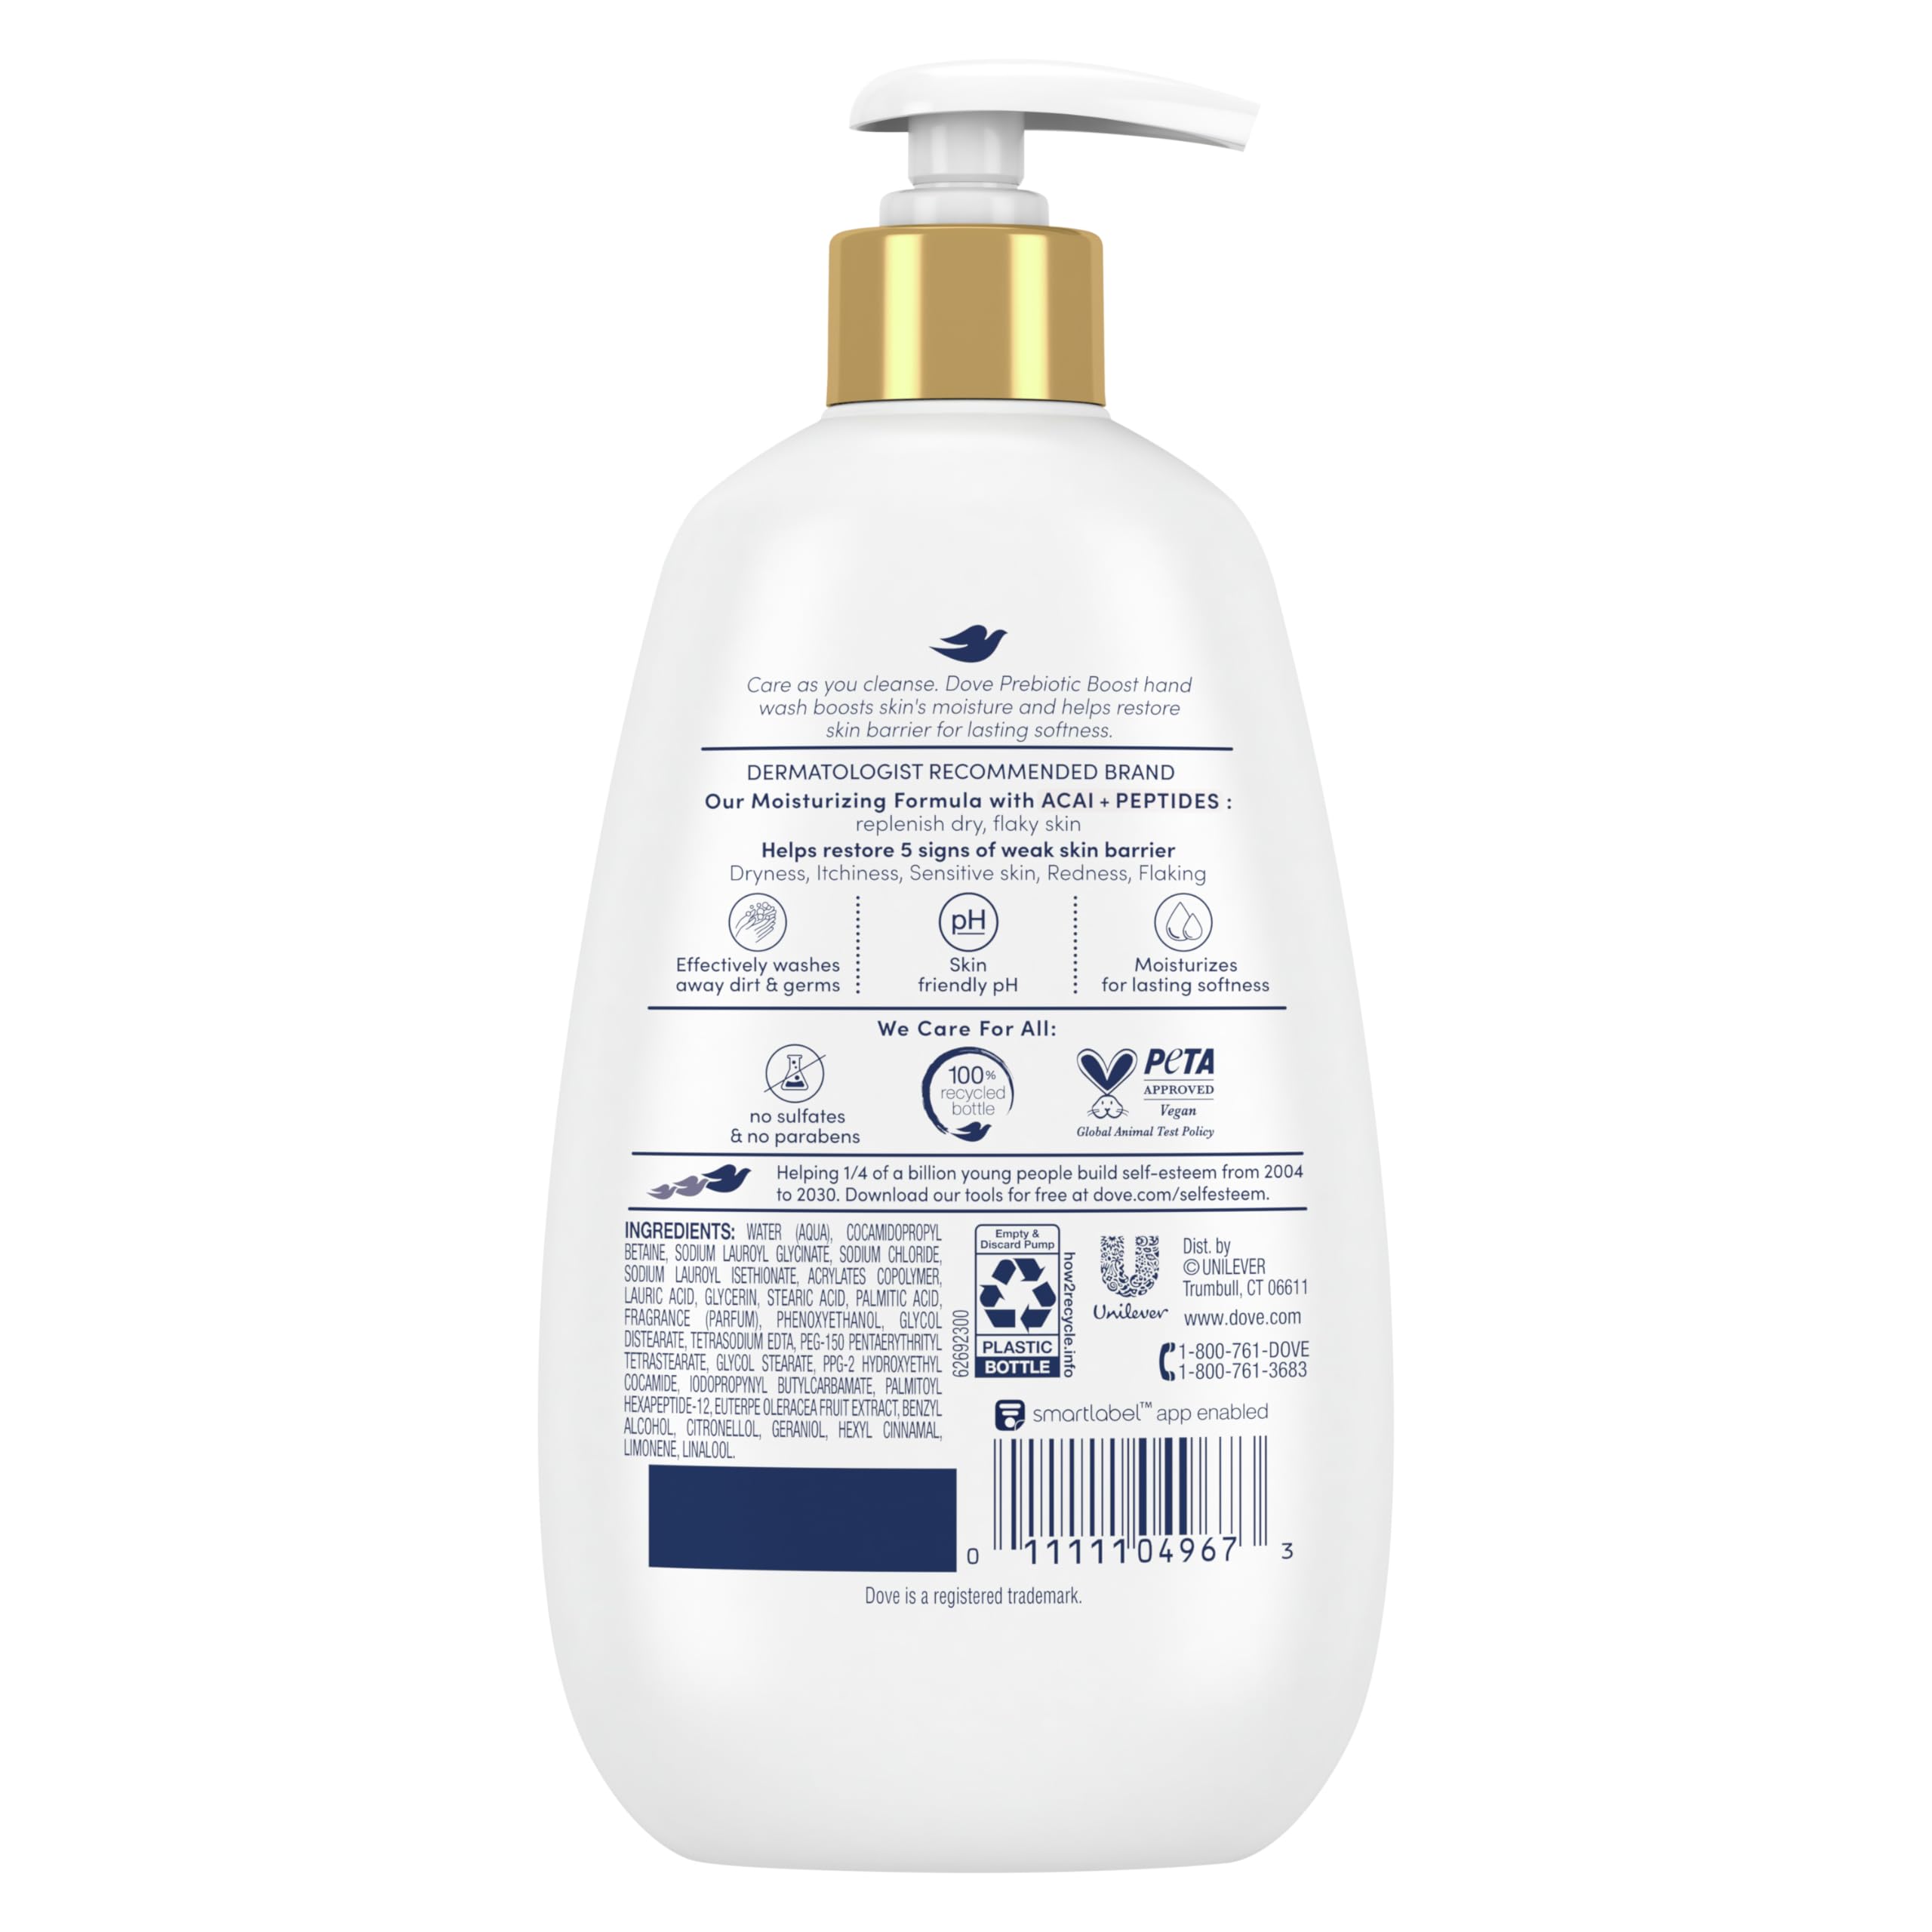 Dove Prebiotic Boost Hand Wash Dryness Remedy 4 Count for Lasting Softness, with Acai & Peptides, 12 oz